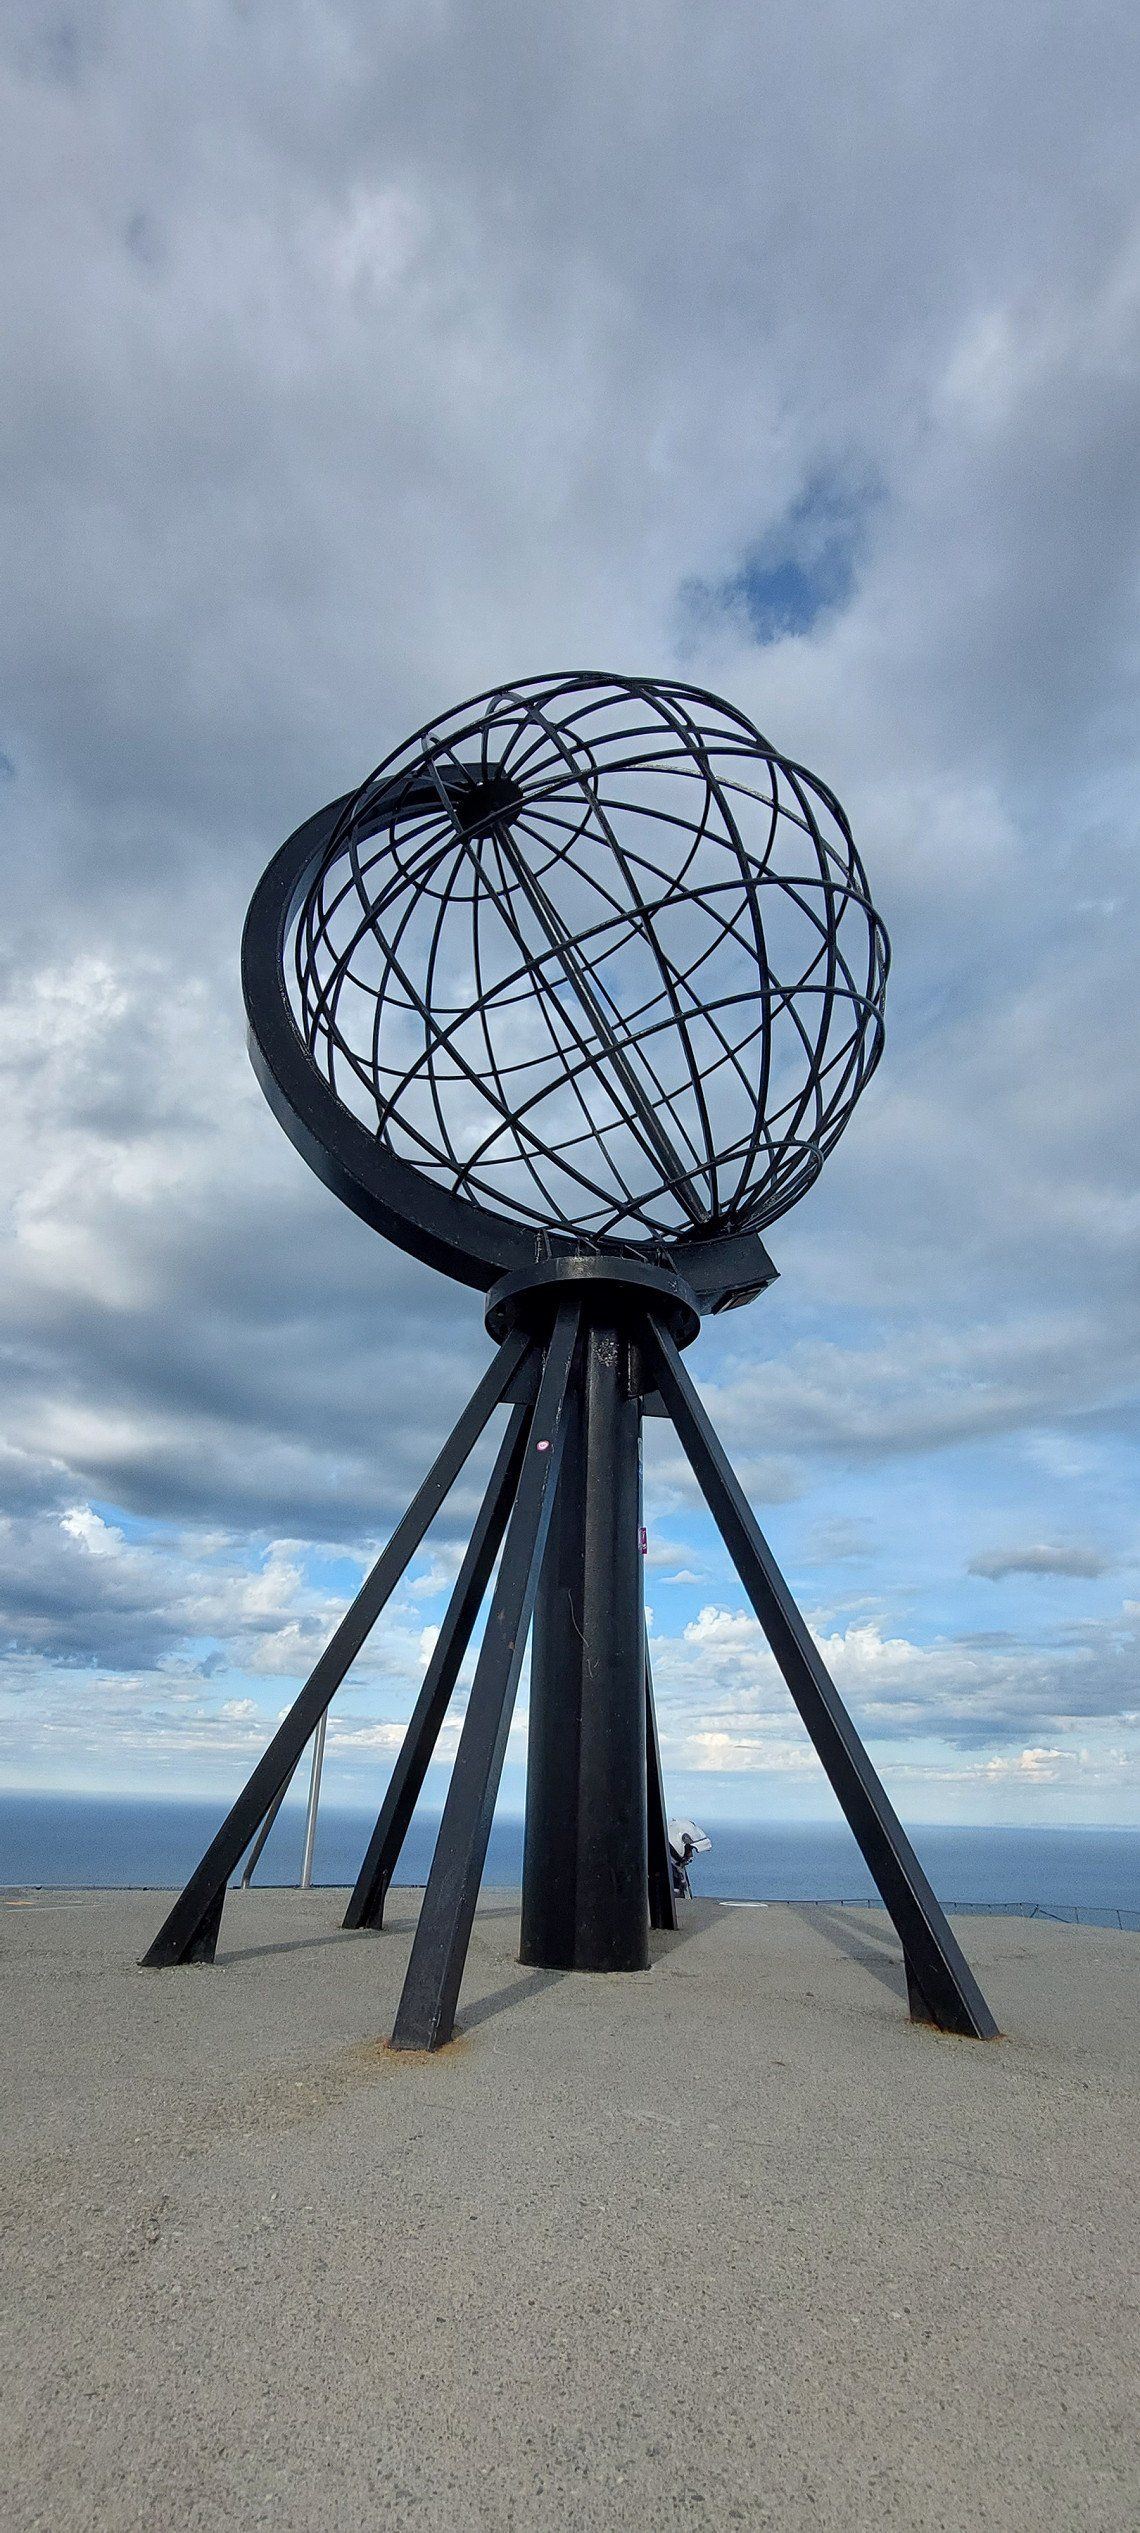 Off to the north, to Nordkapp 2022